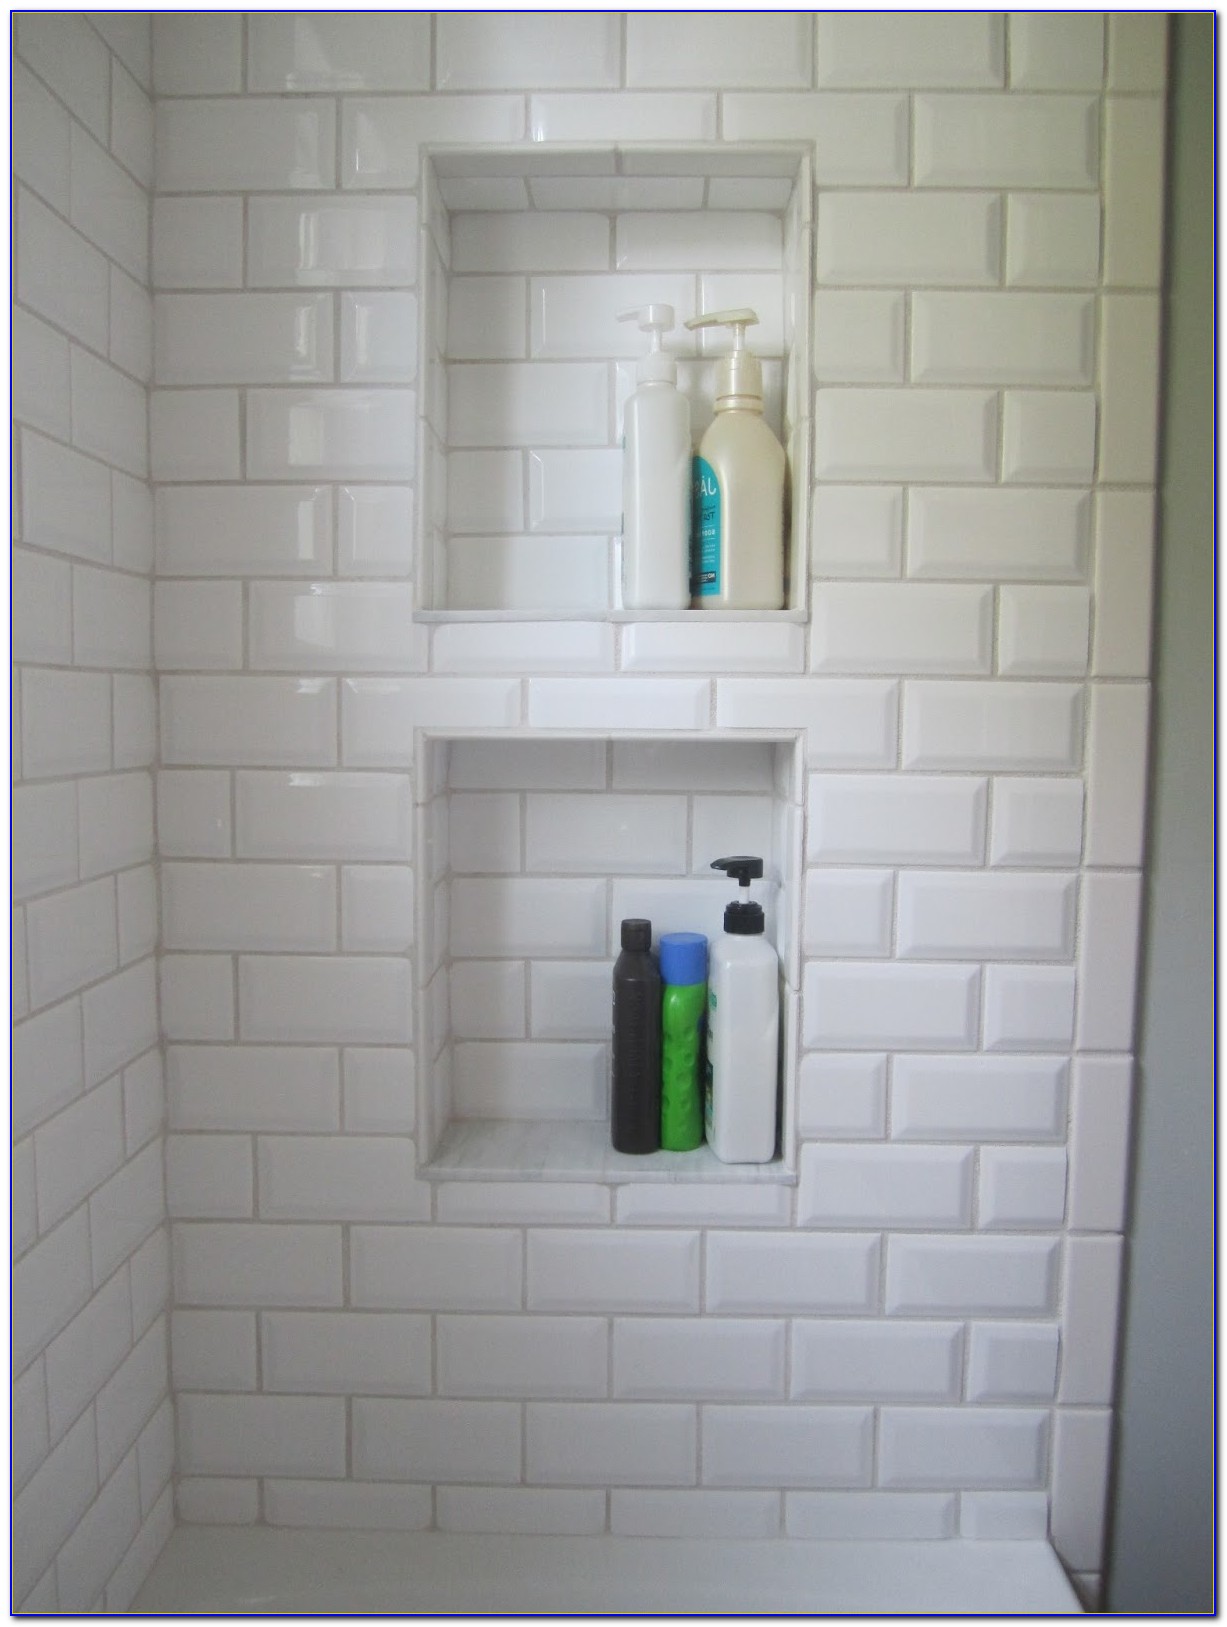 White Beveled Subway Tile With Grey Grout Tiles Home Design Ideas k2DW3mbDl368277